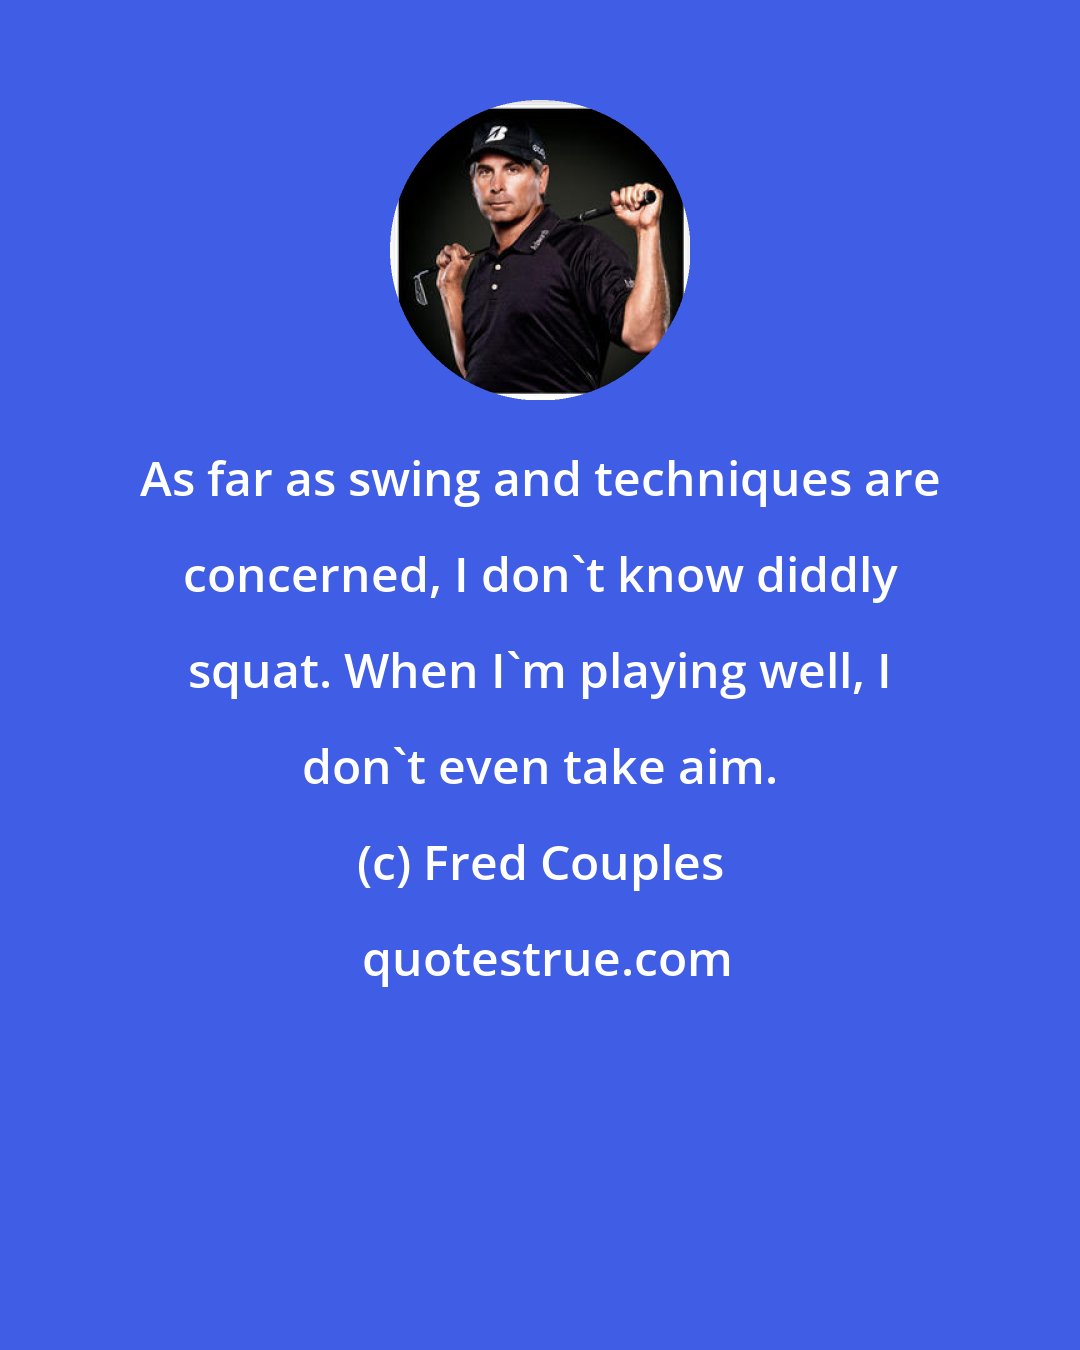 Fred Couples: As far as swing and techniques are concerned, I don't know diddly squat. When I'm playing well, I don't even take aim.